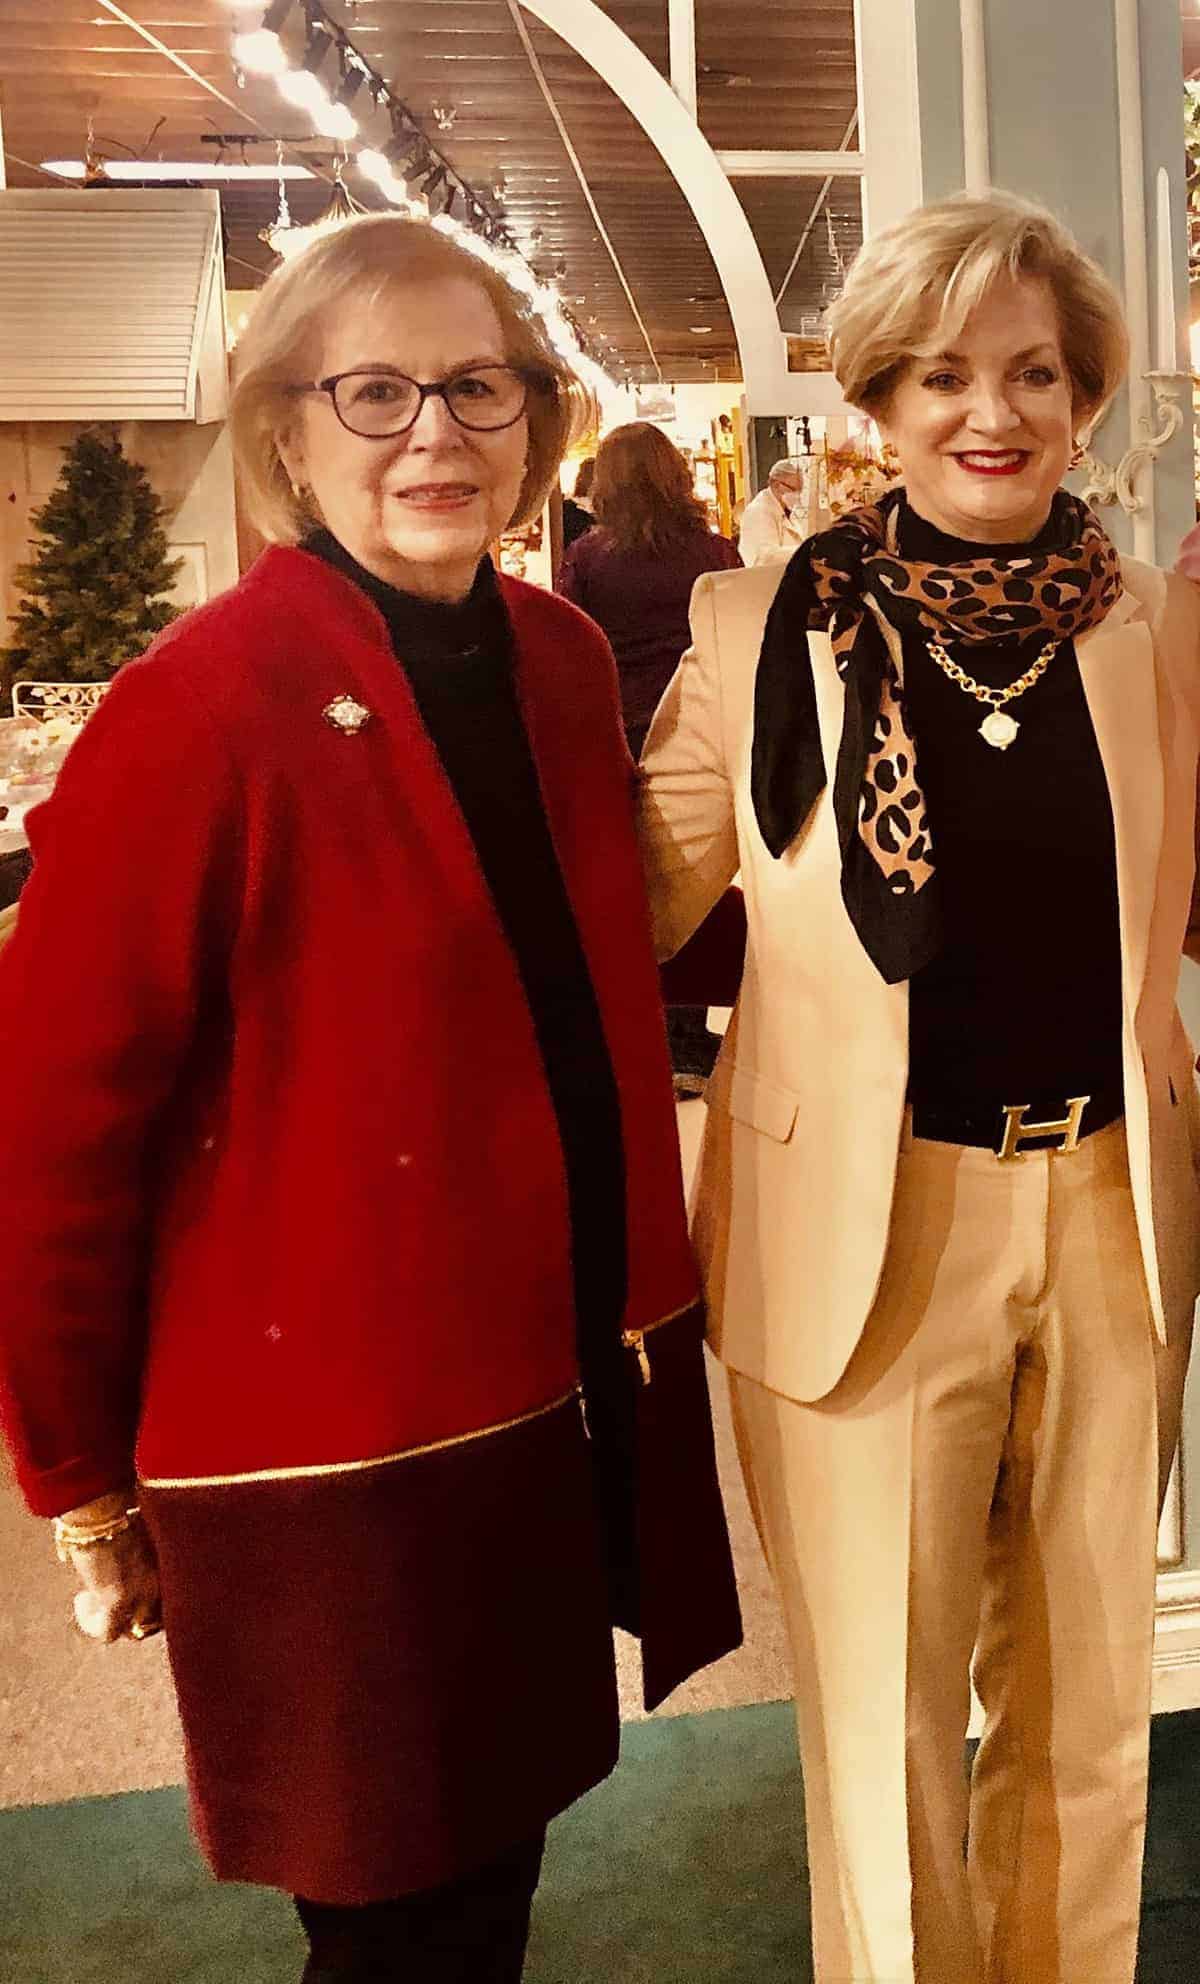 Sharon Allen and Mary Kate McRaney